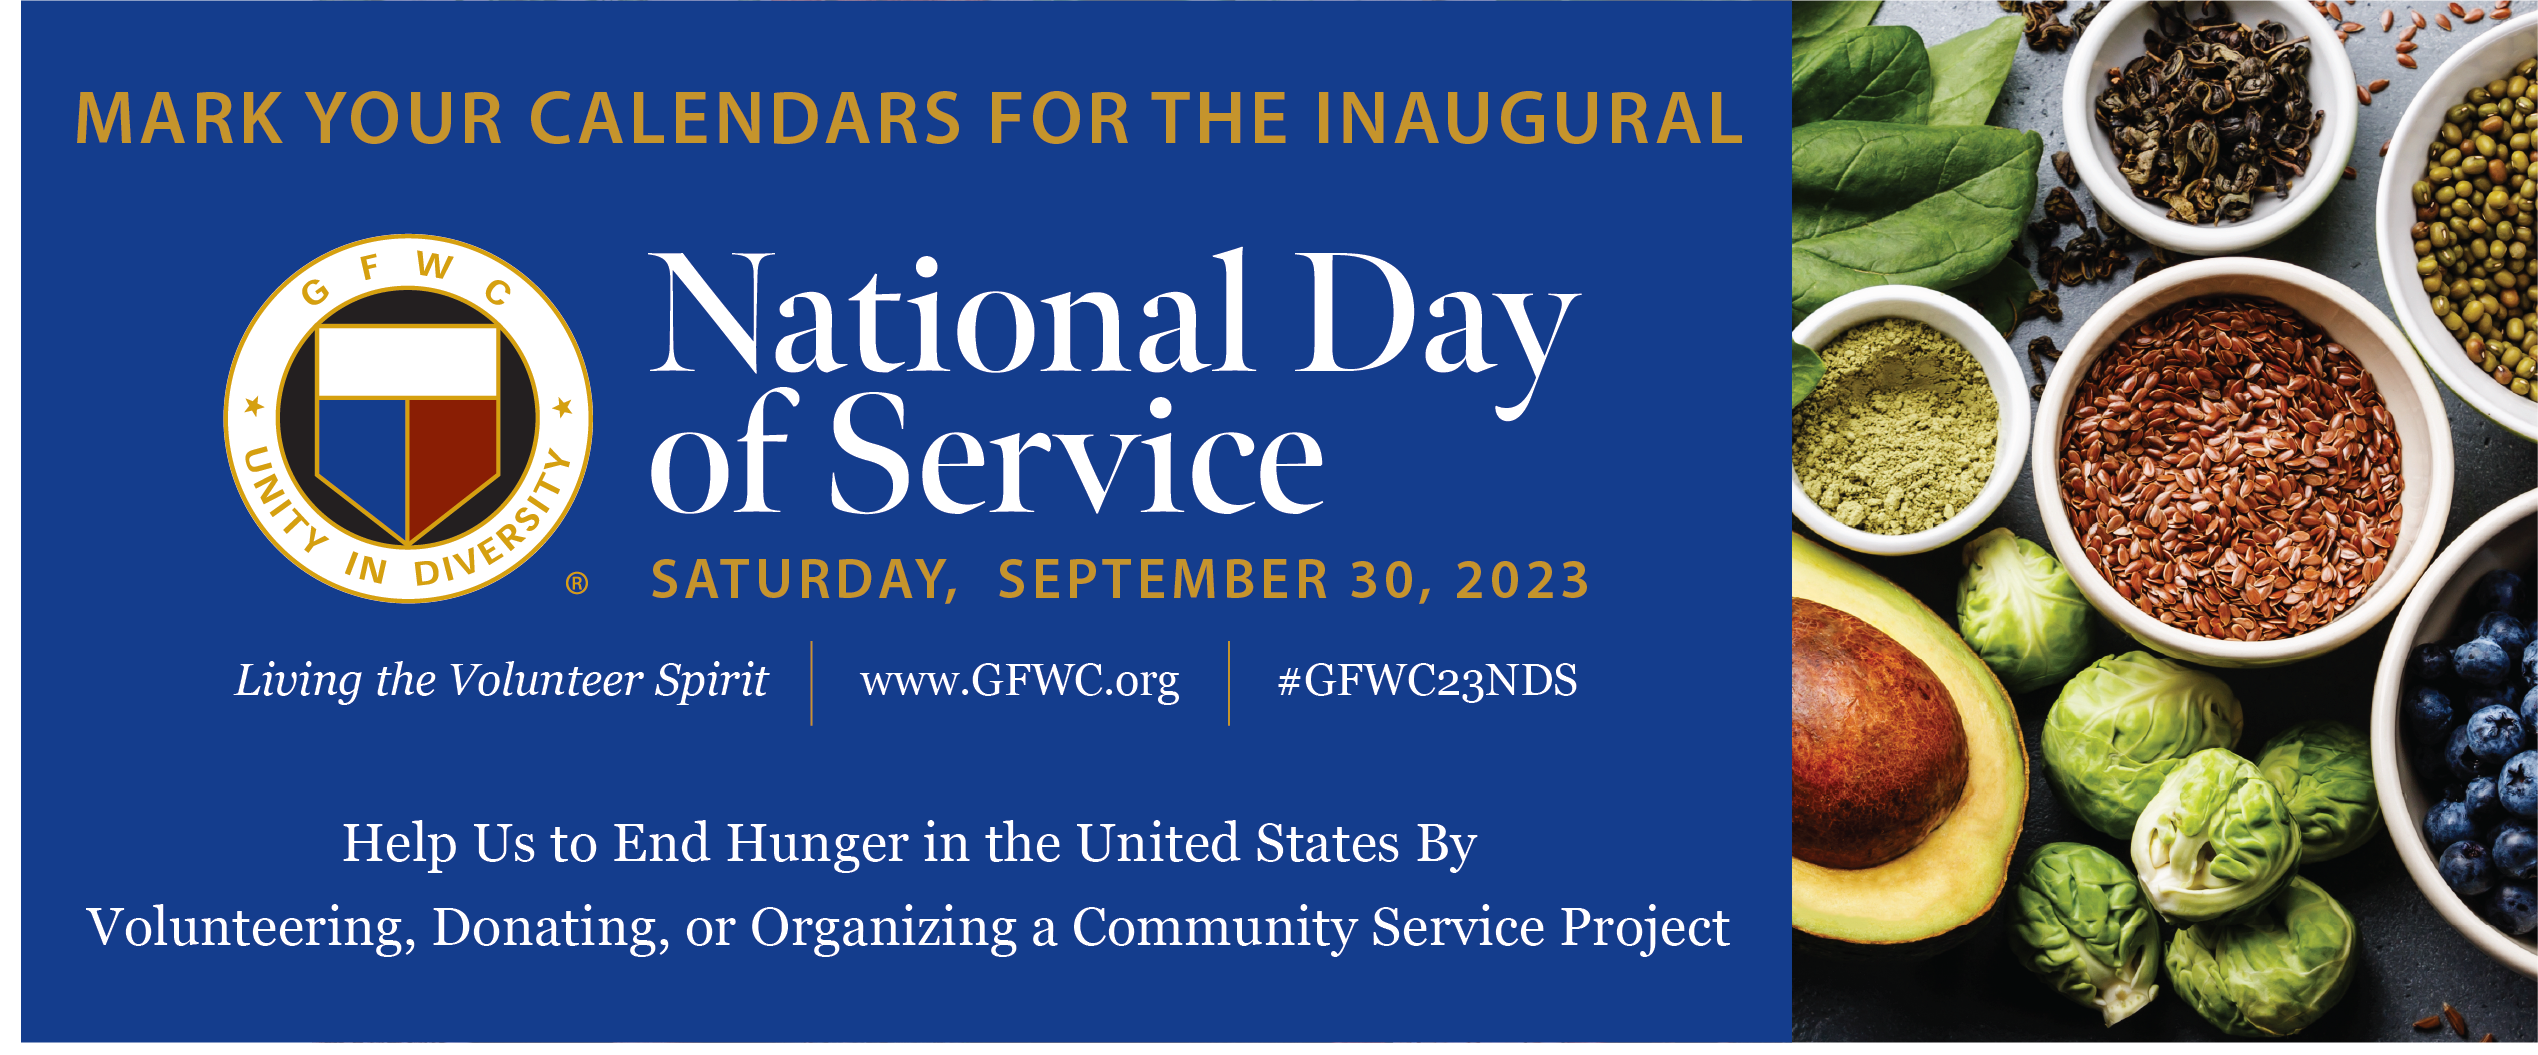 GFWC23supportfoodinsecurity